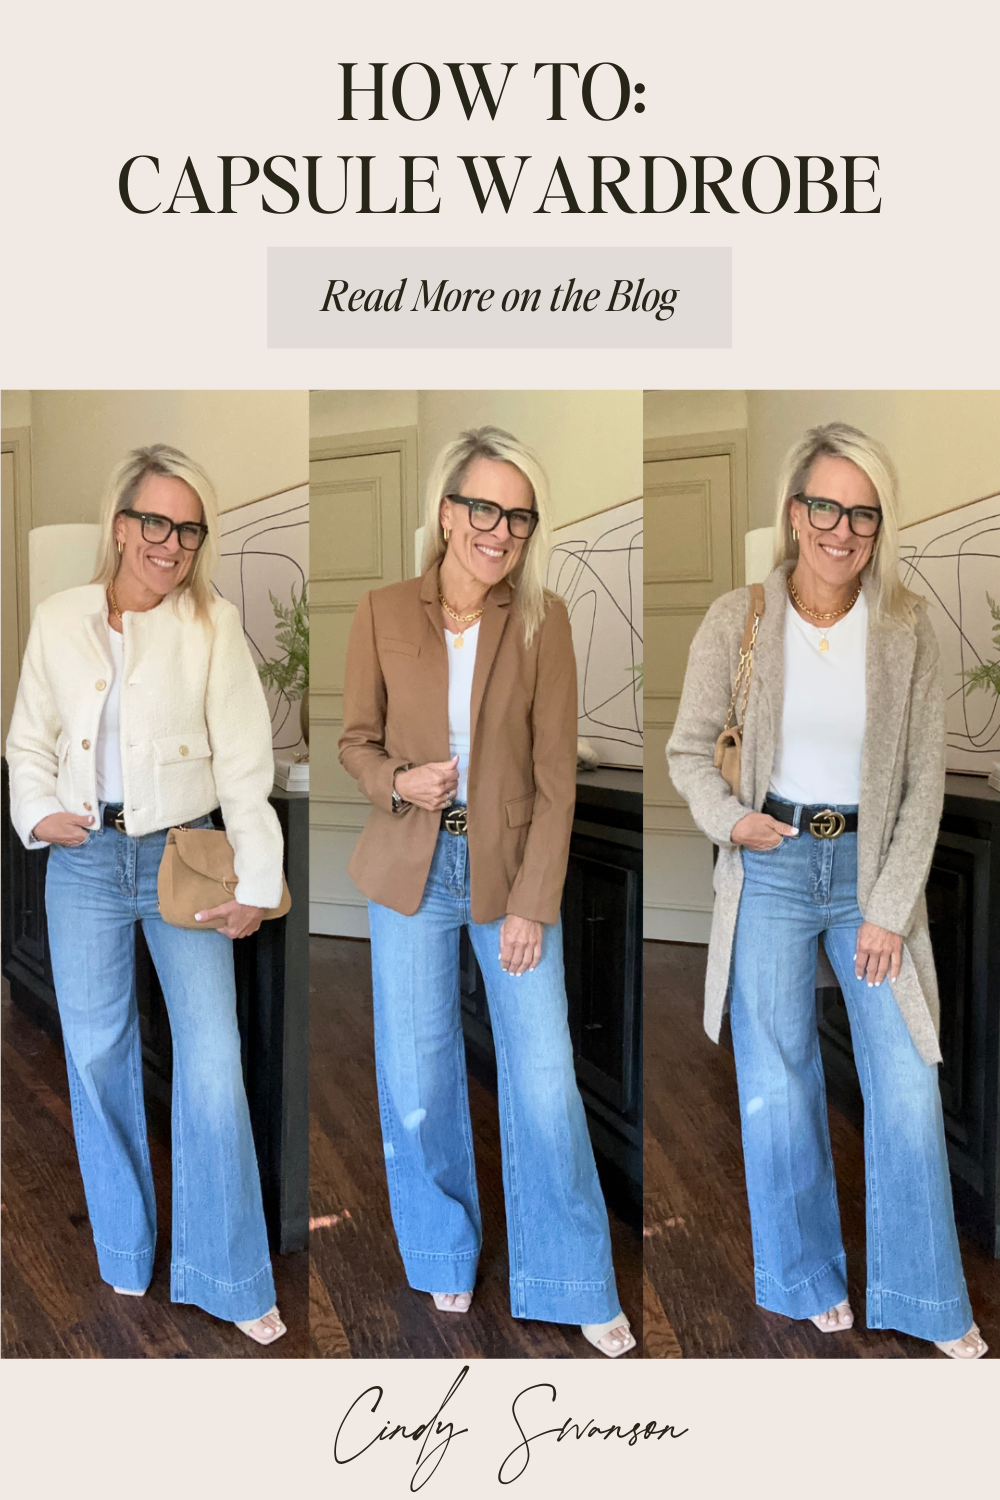 capsule wardrobe, how to, cindy swanson, neutrals, capsule closet, outfit options, blazer, fall outfit, winter outfit